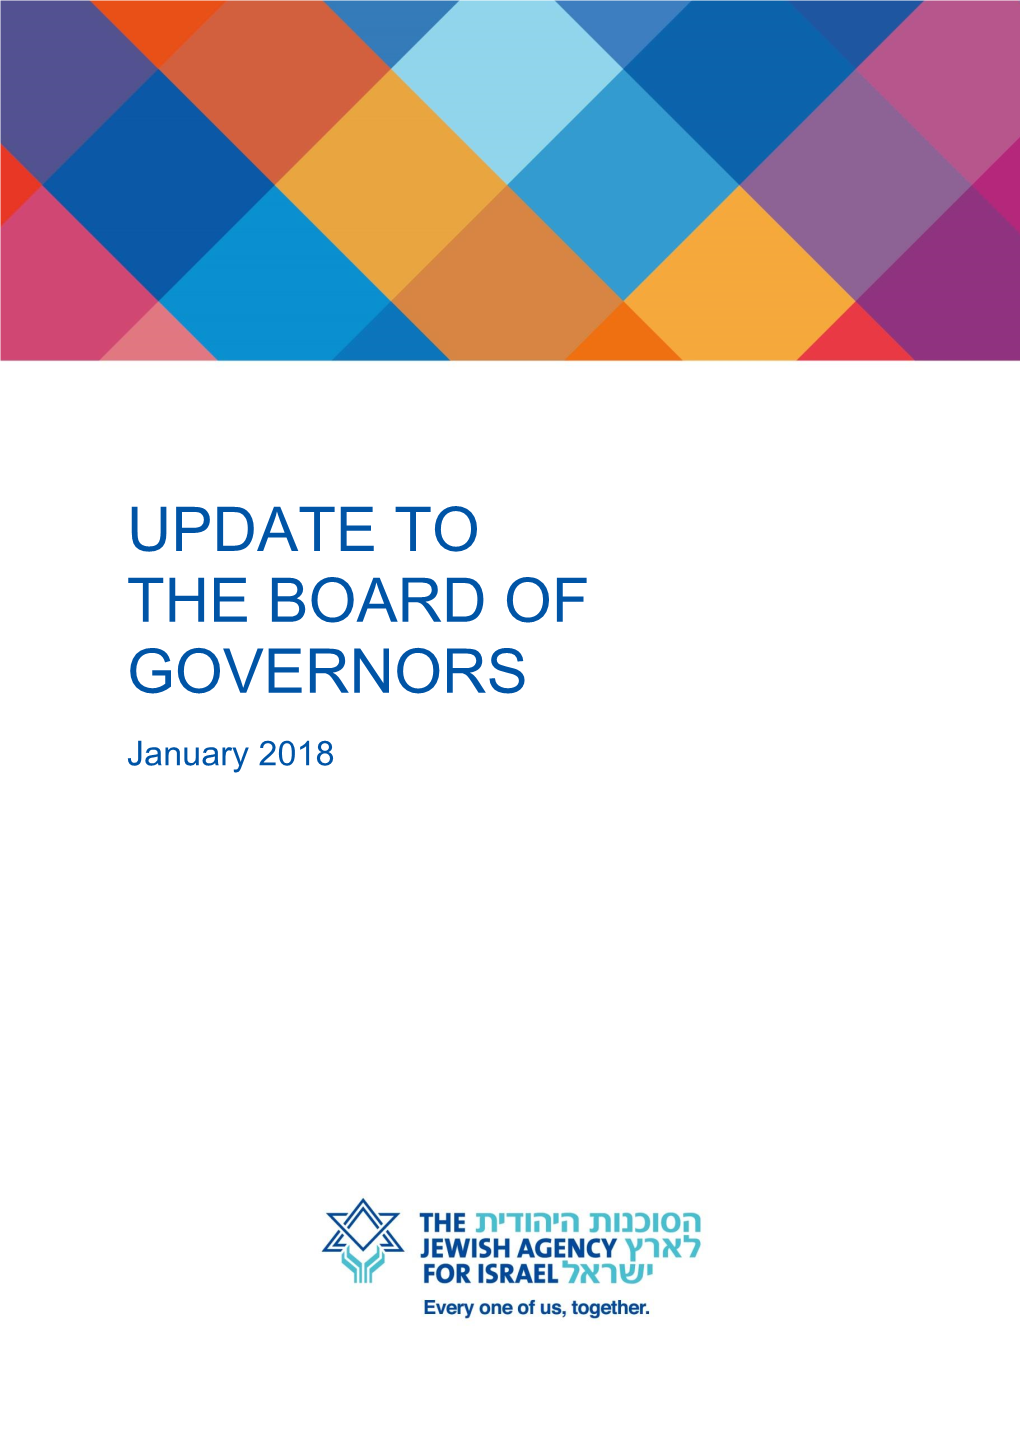 Update to the Board of Governors